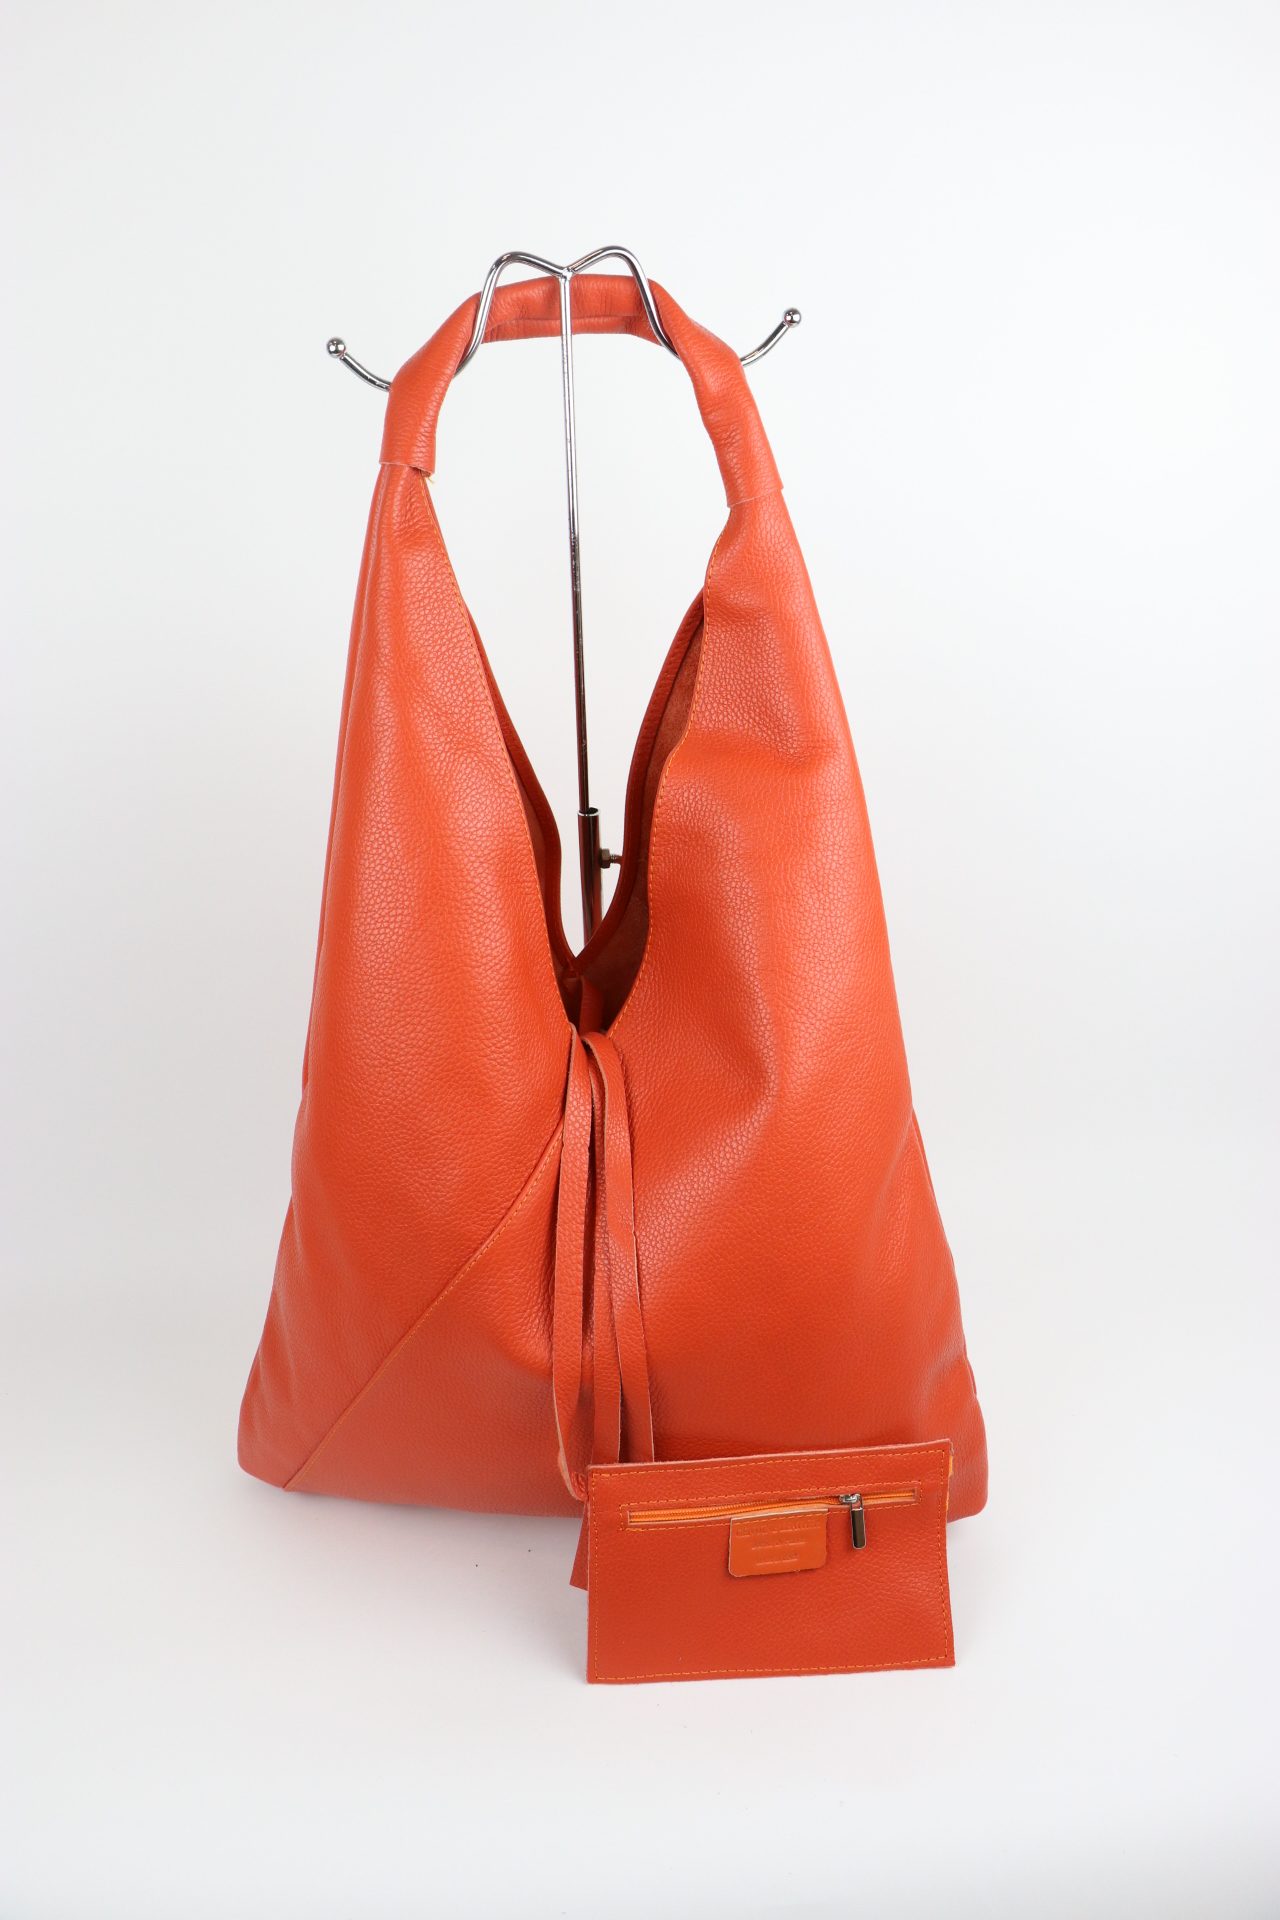 Sulu Non Leather Vegan Slouch Tote Bag By Goodeehoo | notonthehighstreet.com